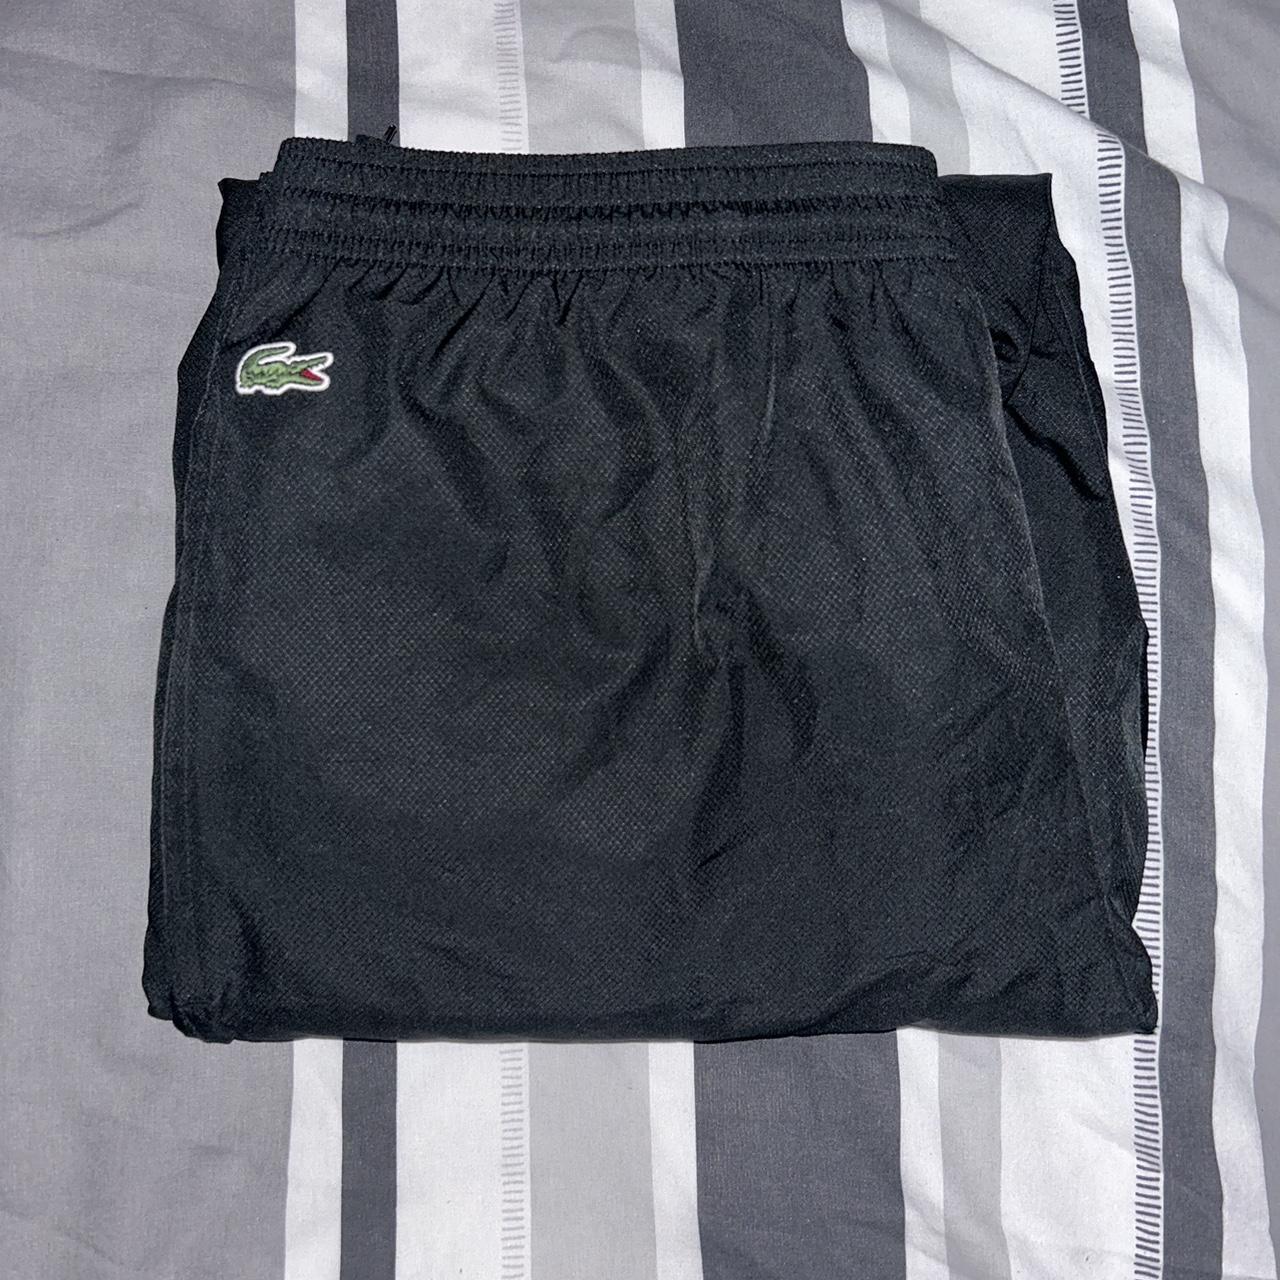 Very Rare OG Full Black Lacoste Joggers Condition -... - Depop